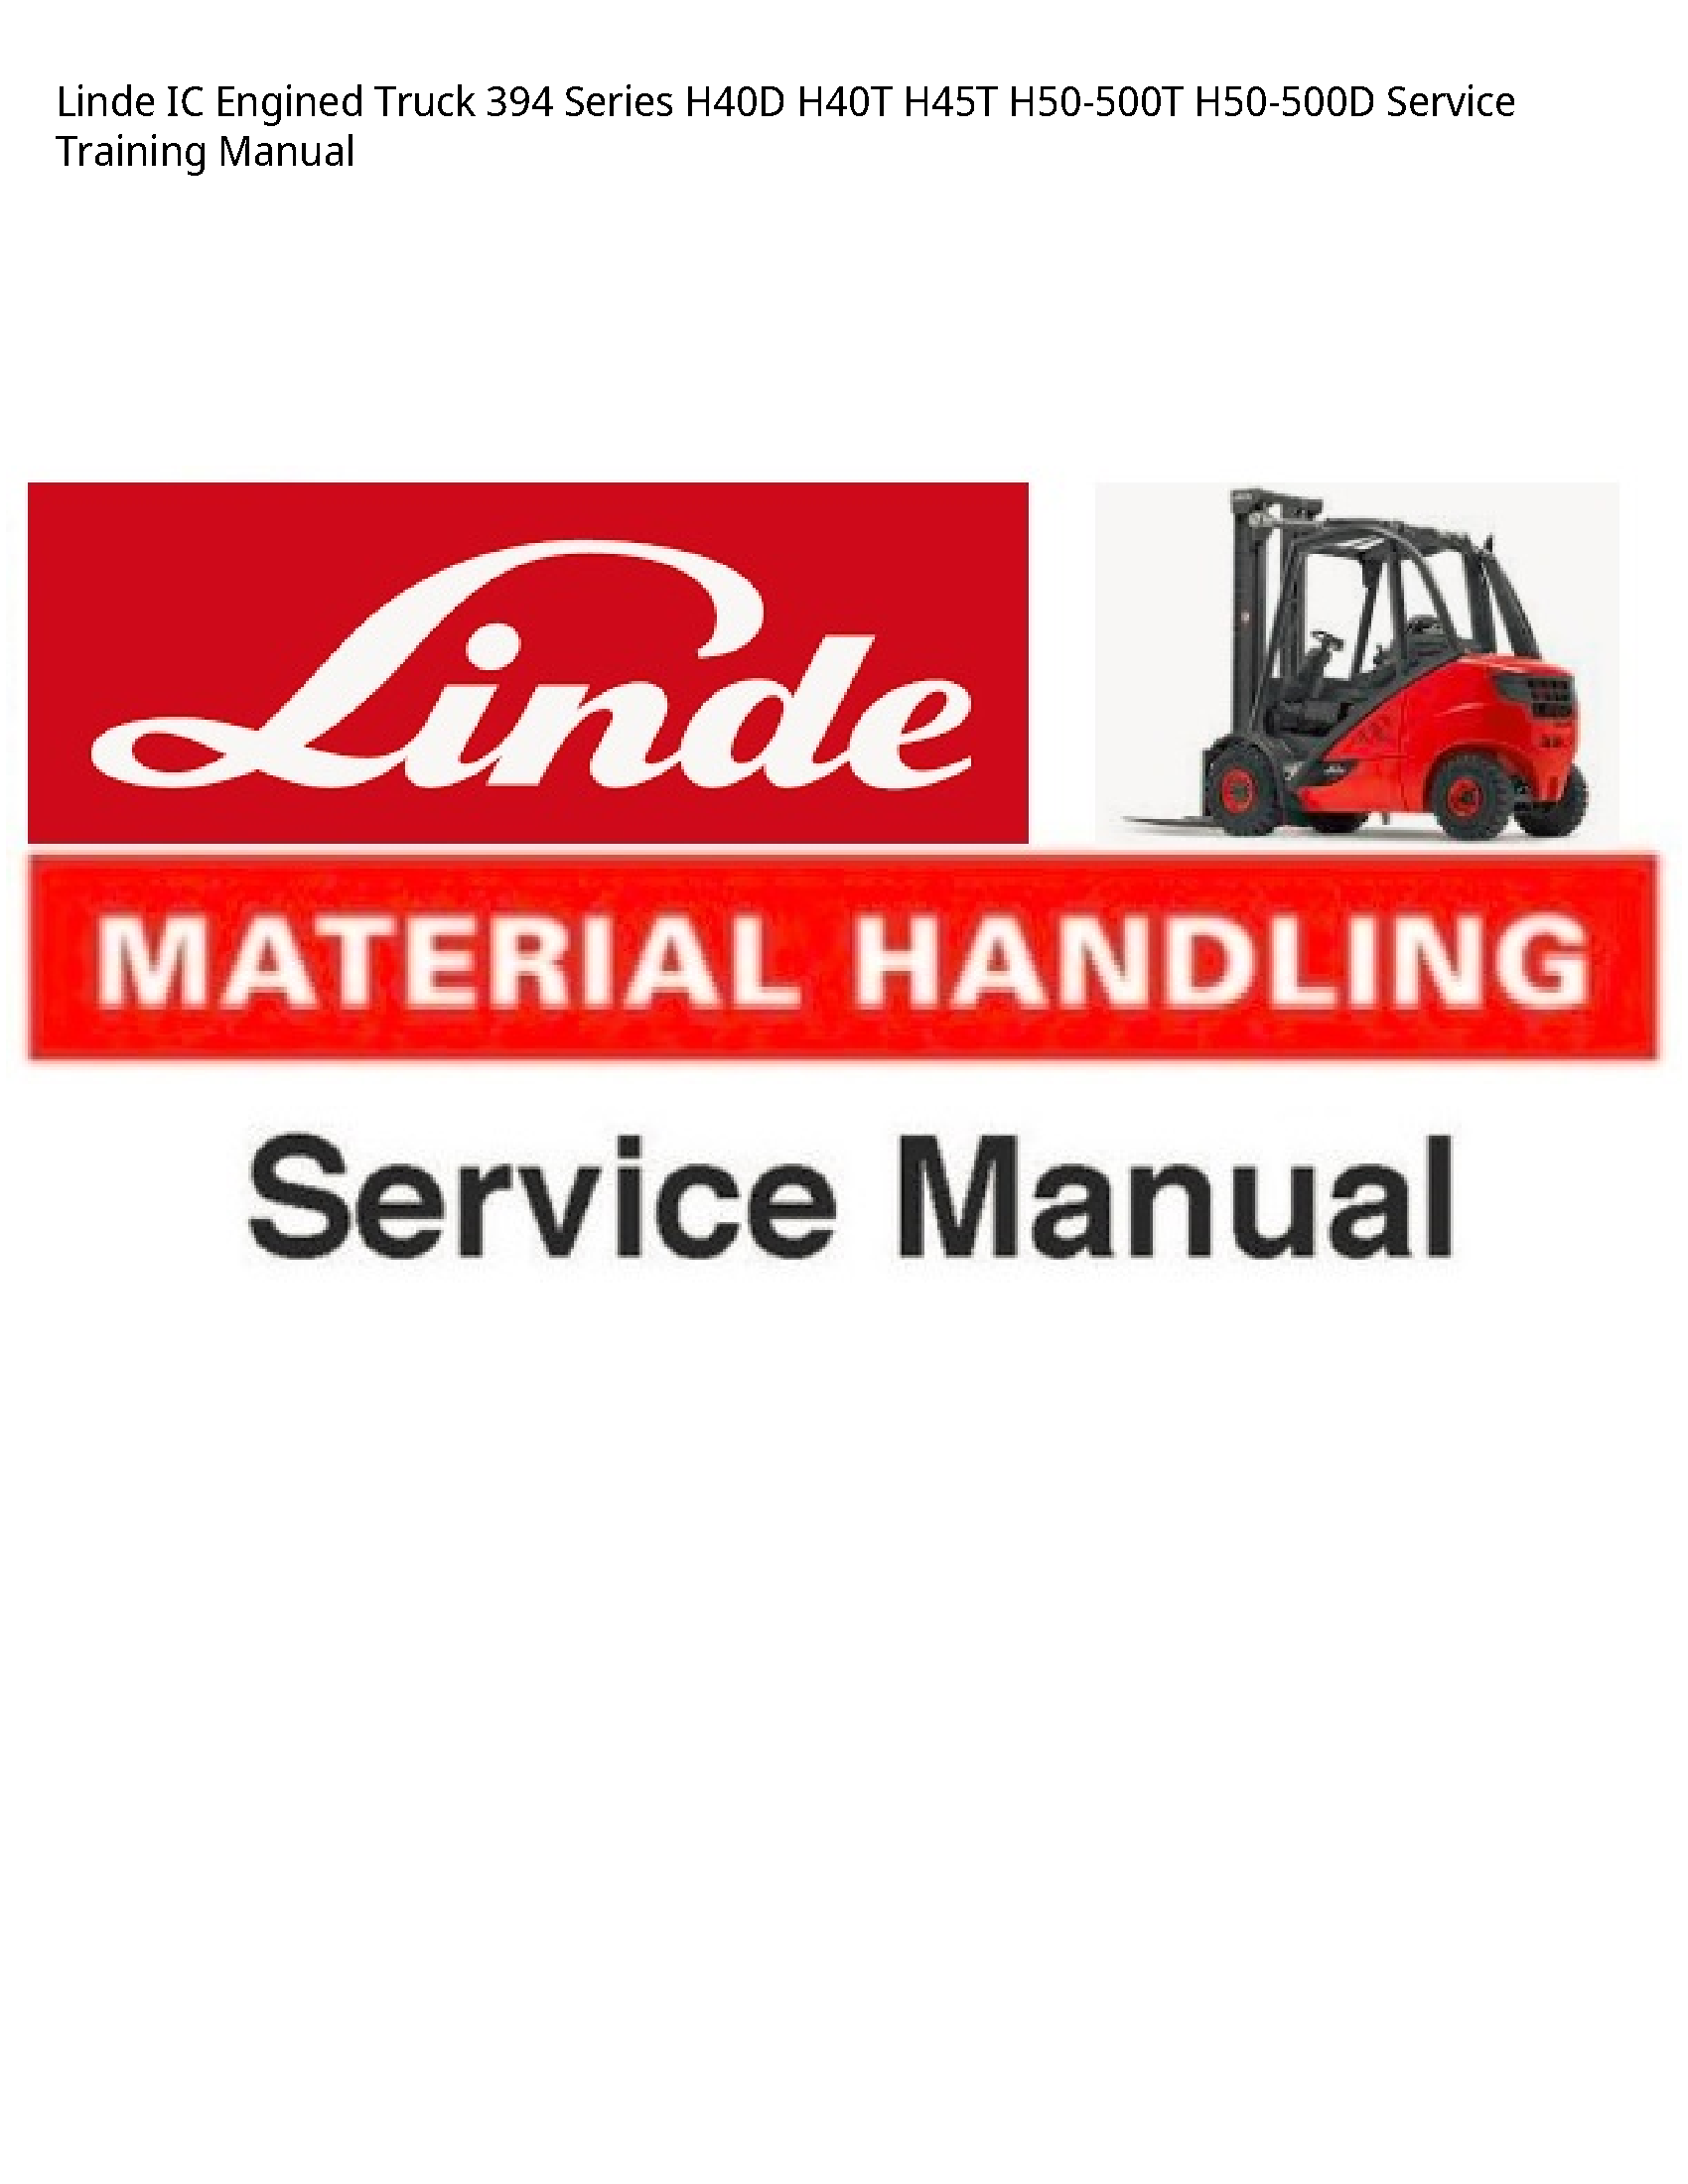 Linde 394 IC Engined Truck Series Service Training manual